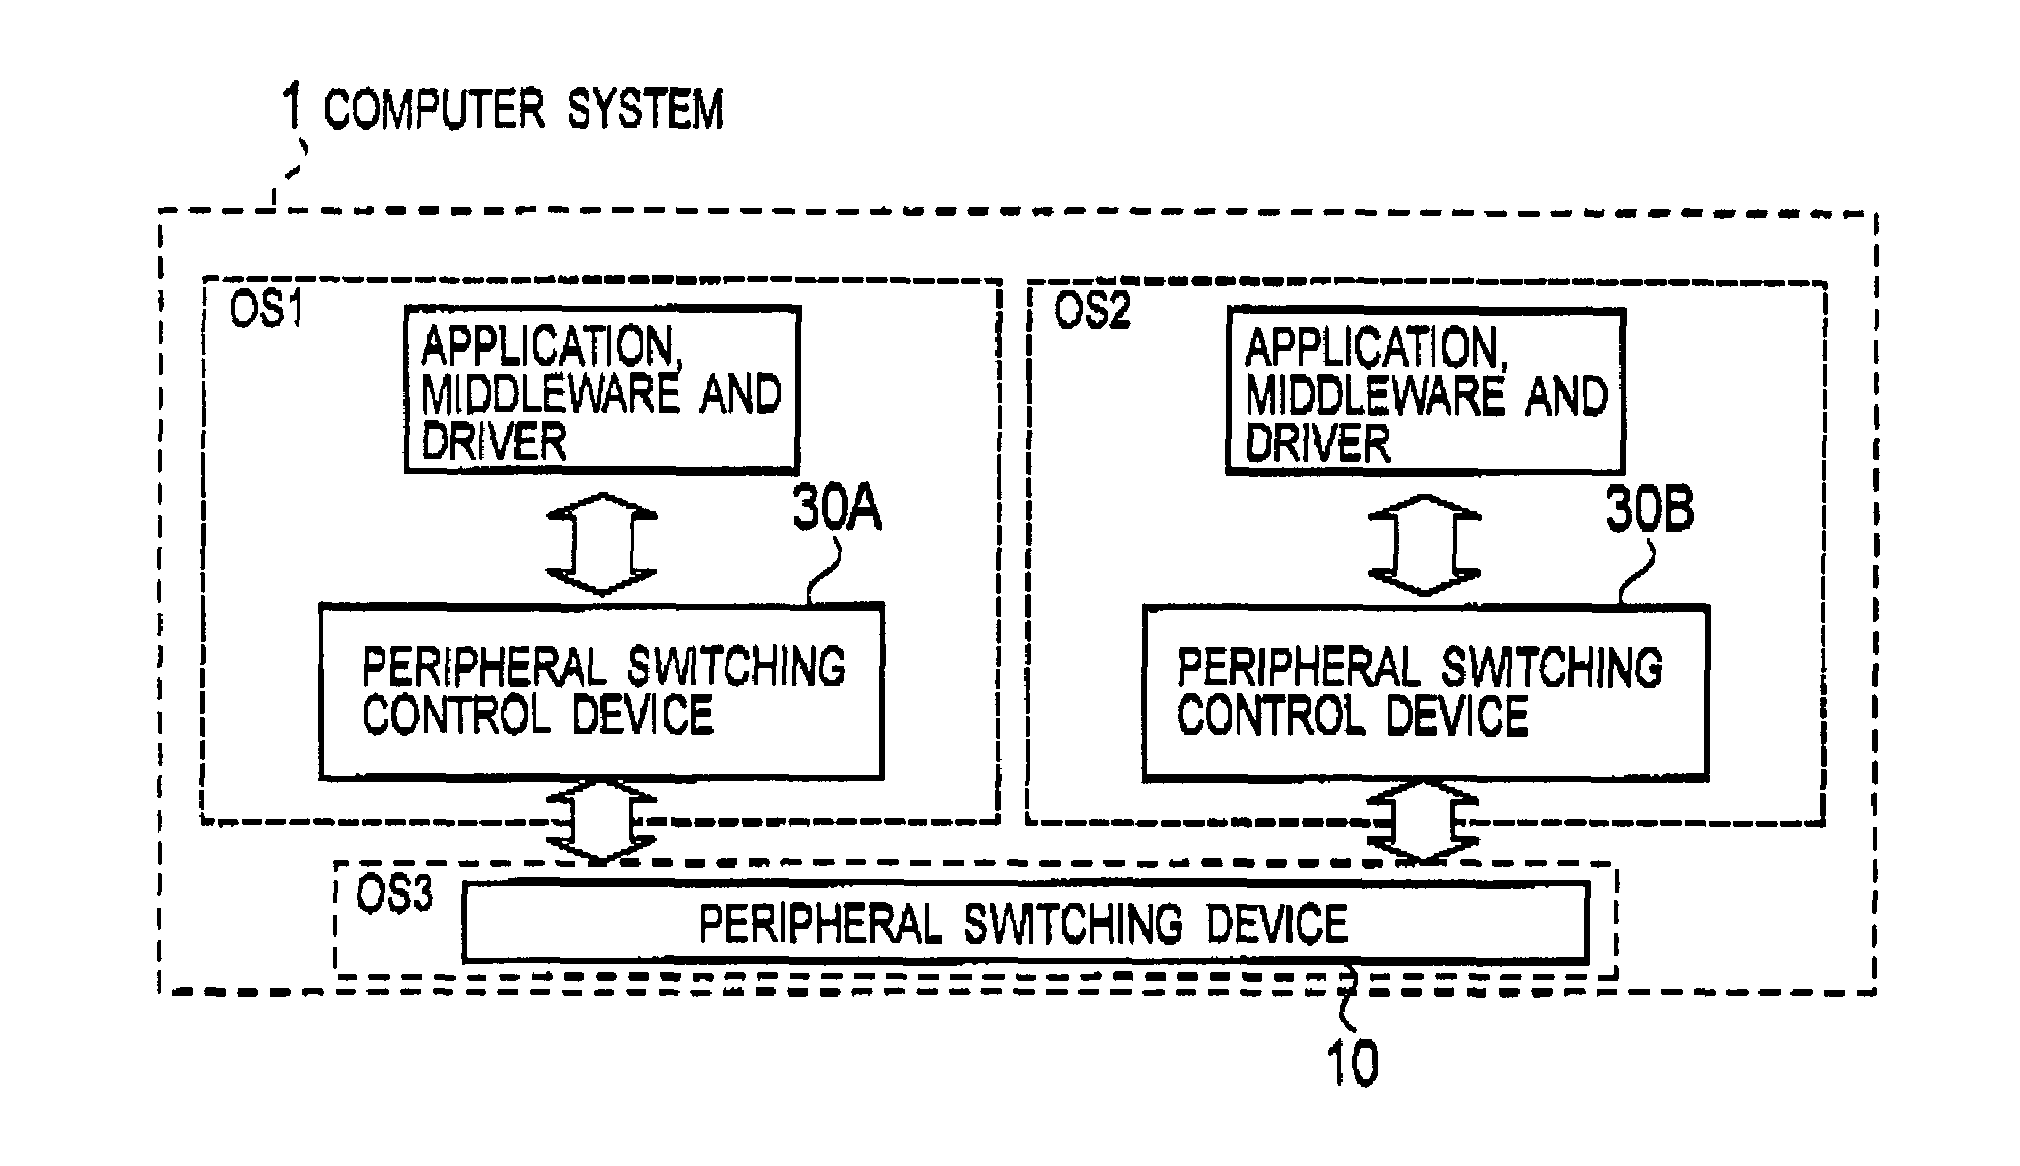 Peripheral switching device and a peripheral switching control device